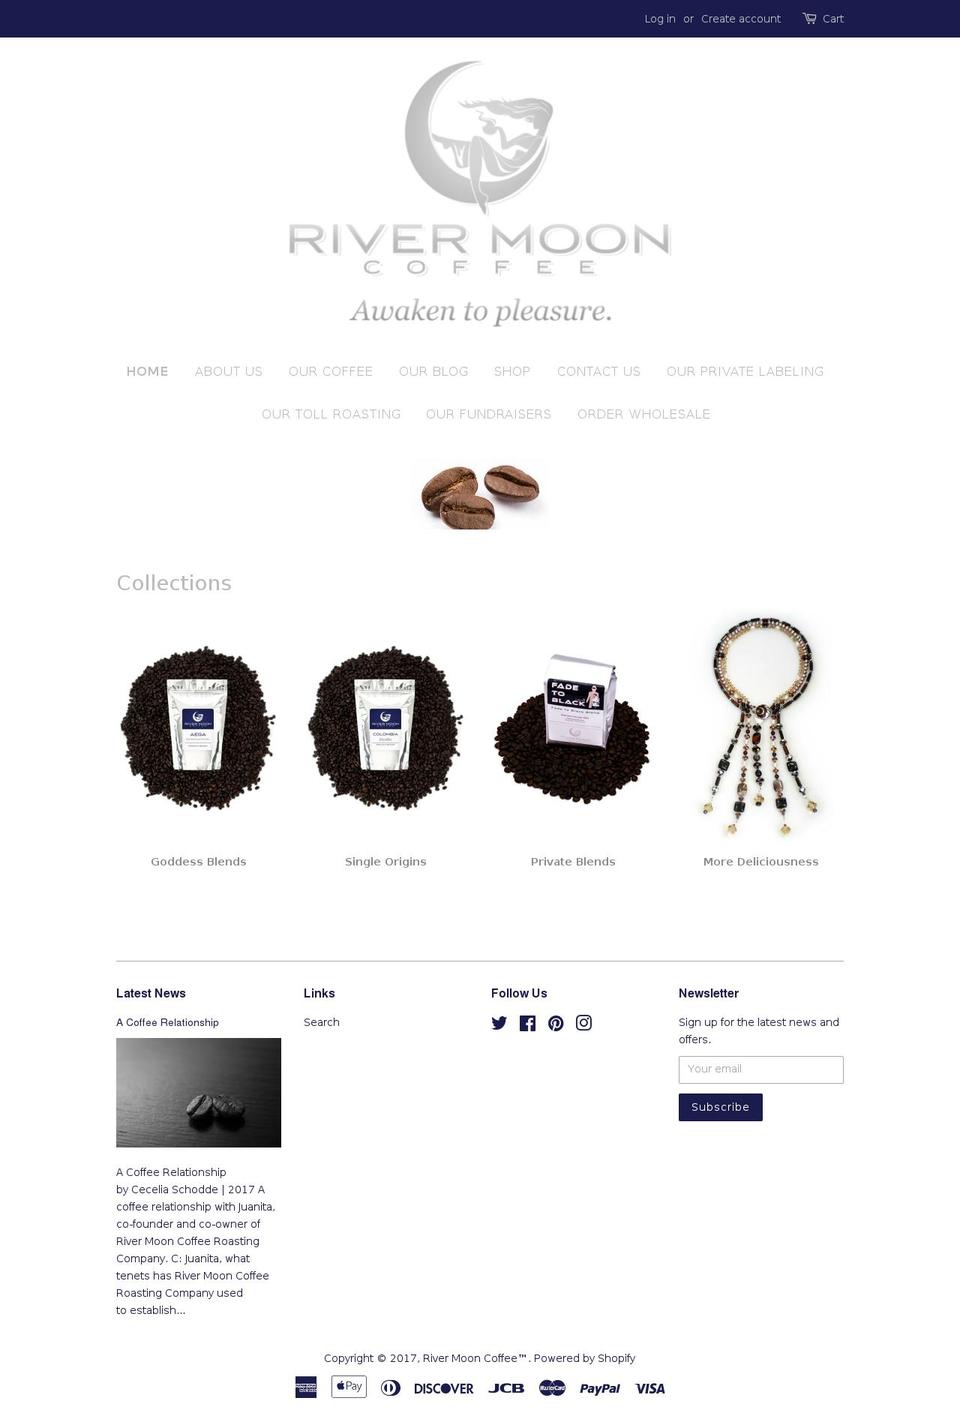 Live Site Shopify theme site example rivermooncoffee.com